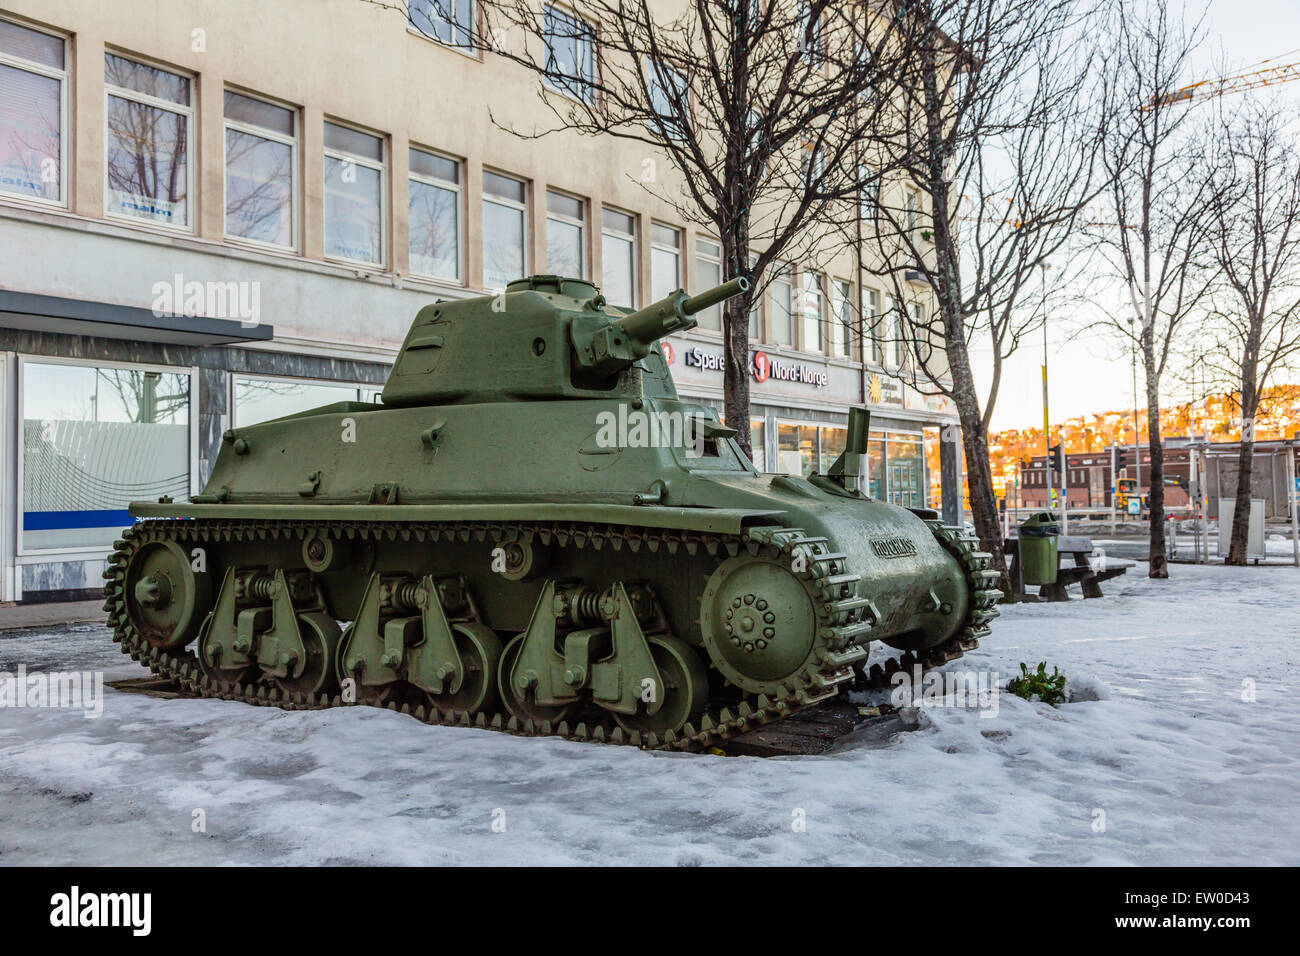 The Hotchkiss H35 tank outside the war museum in Narvik, Norway Stock Photo